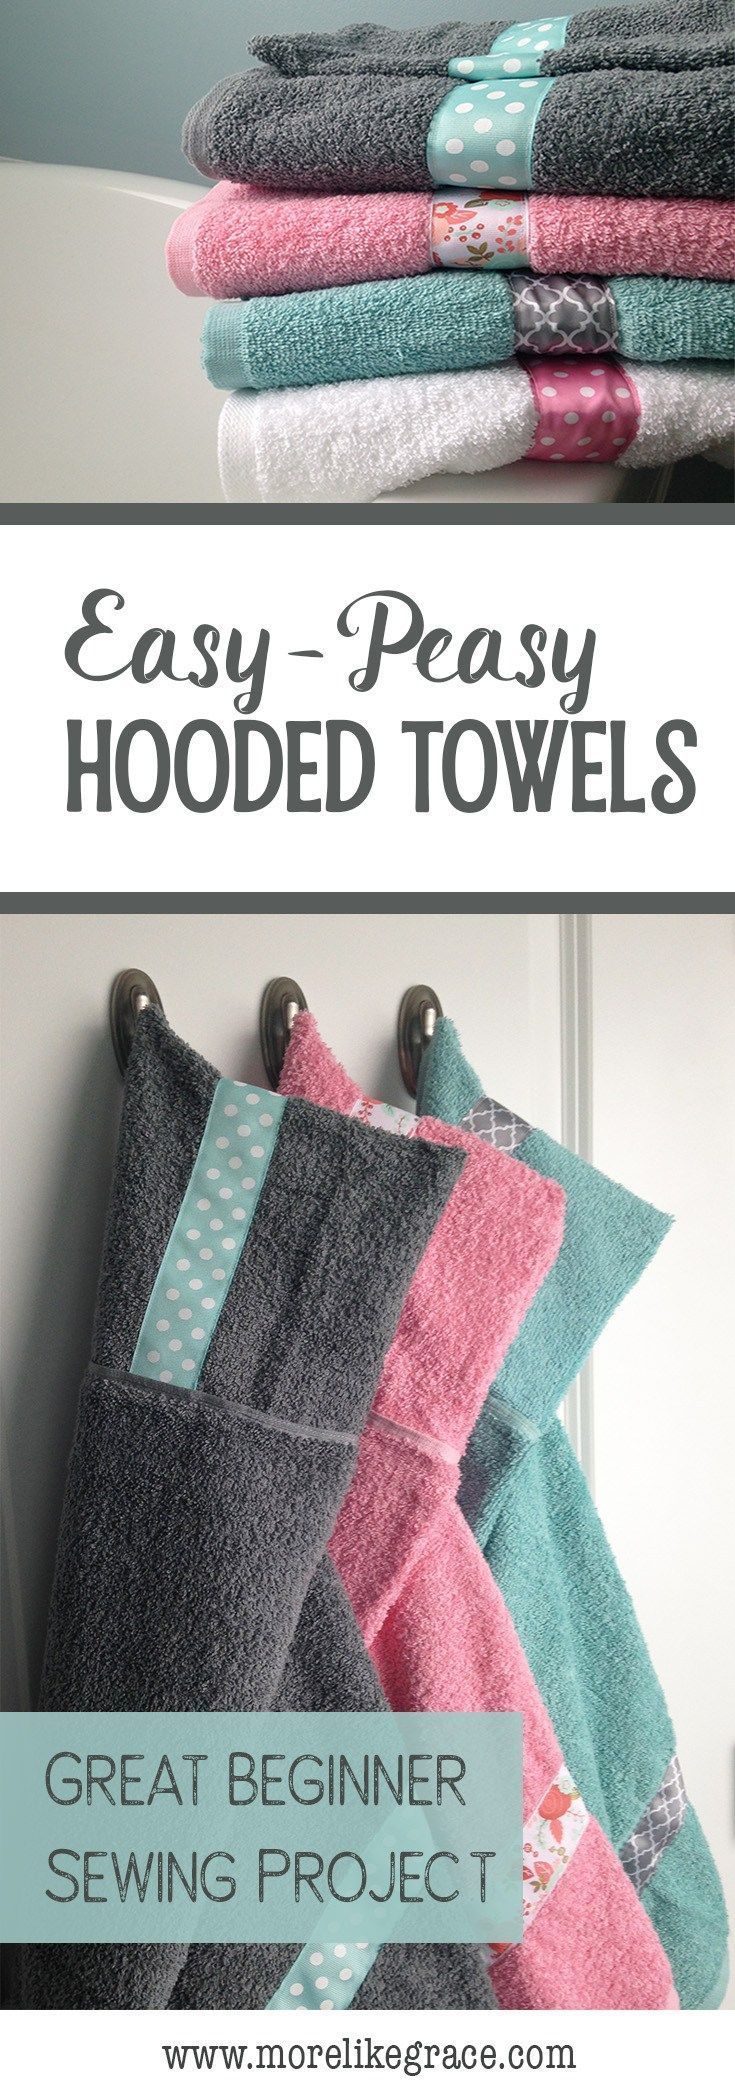 Hooded Towel Tutorial: Great for Babies and Toddlers -   13 diy projects Sewing style ideas